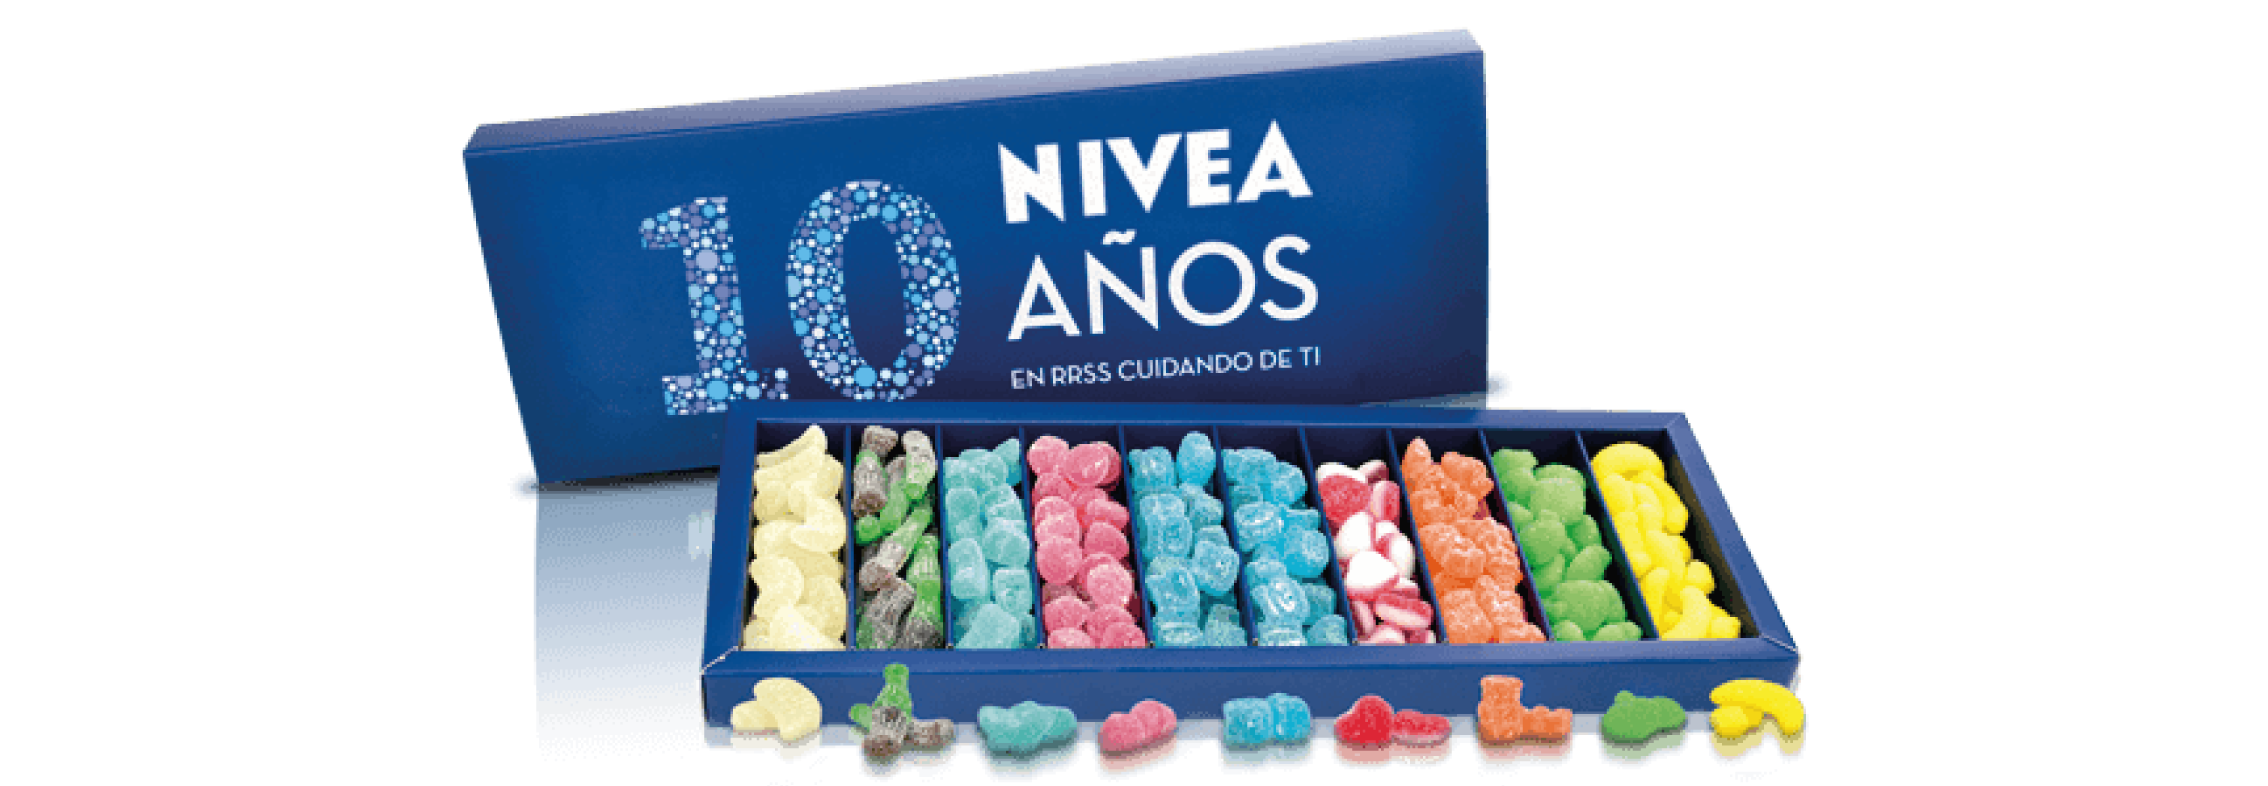 Box containing a mix of candies that can recreate the birthday number